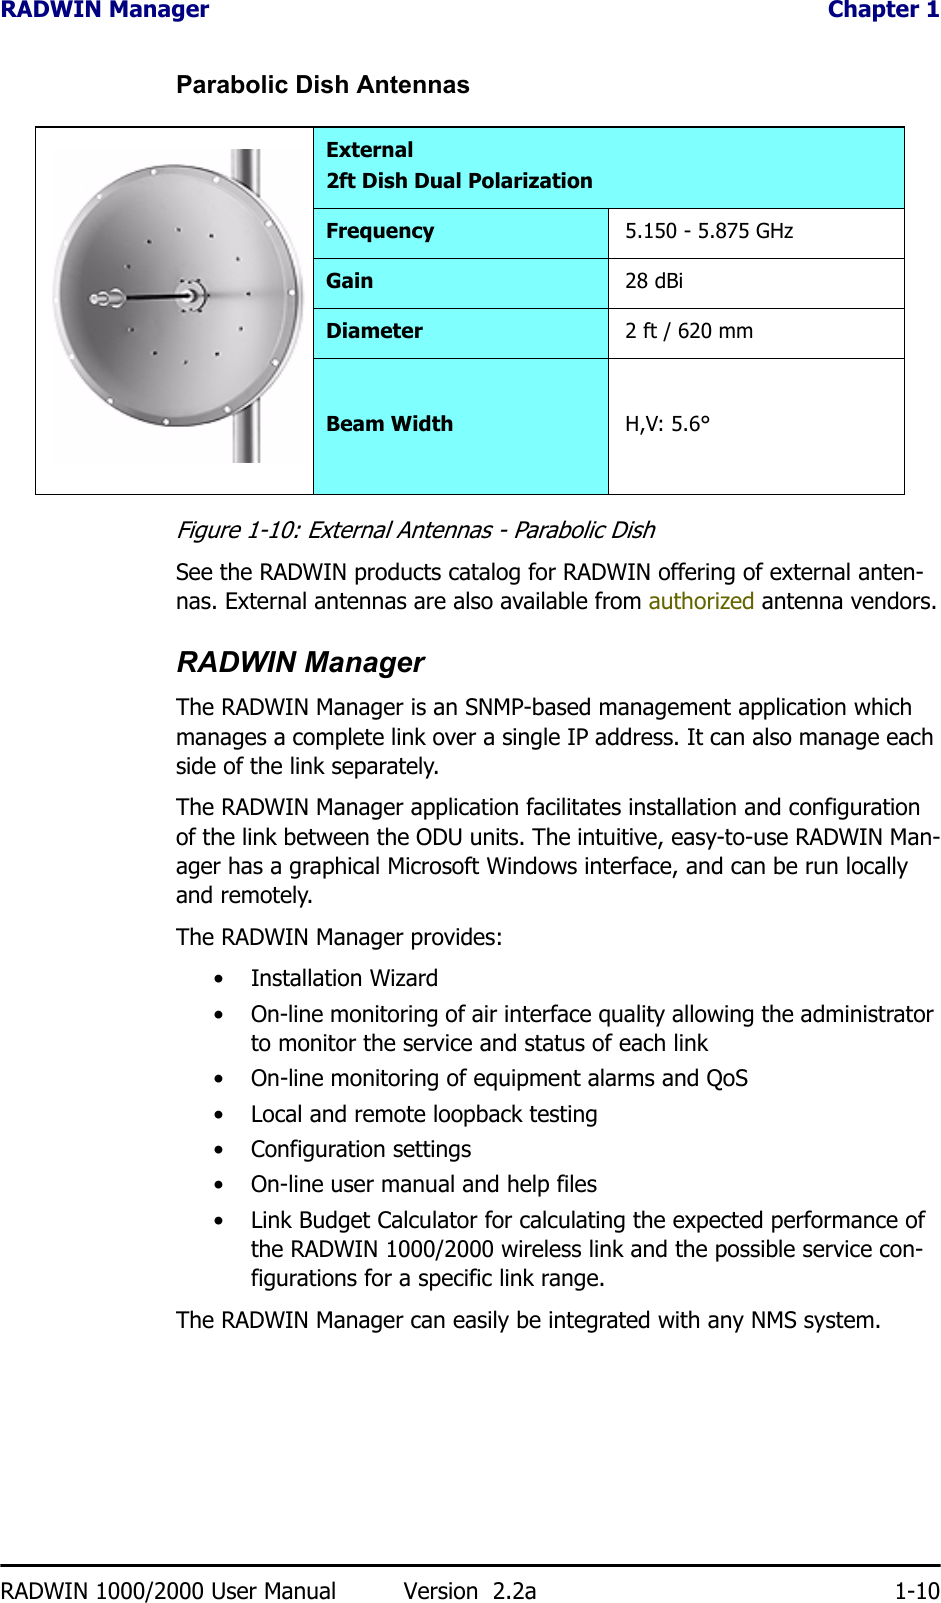 RADWIN Manager  Chapter 1RADWIN 1000/2000 User Manual Version  2.2a 1-10Parabolic Dish AntennasFigure 1-10: External Antennas - Parabolic DishSee the RADWIN products catalog for RADWIN offering of external anten-nas. External antennas are also available from authorized antenna vendors.RADWIN ManagerThe RADWIN Manager is an SNMP-based management application which manages a complete link over a single IP address. It can also manage each side of the link separately.The RADWIN Manager application facilitates installation and configuration of the link between the ODU units. The intuitive, easy-to-use RADWIN Man-ager has a graphical Microsoft Windows interface, and can be run locally and remotely. The RADWIN Manager provides:• Installation Wizard• On-line monitoring of air interface quality allowing the administrator to monitor the service and status of each link• On-line monitoring of equipment alarms and QoS• Local and remote loopback testing• Configuration settings• On-line user manual and help files• Link Budget Calculator for calculating the expected performance of the RADWIN 1000/2000 wireless link and the possible service con-figurations for a specific link range.The RADWIN Manager can easily be integrated with any NMS system.External2ft Dish Dual PolarizationFrequency 5.150 - 5.875 GHzGain 28 dBiDiameter 2 ft / 620 mmBeam Width H,V: 5.6°